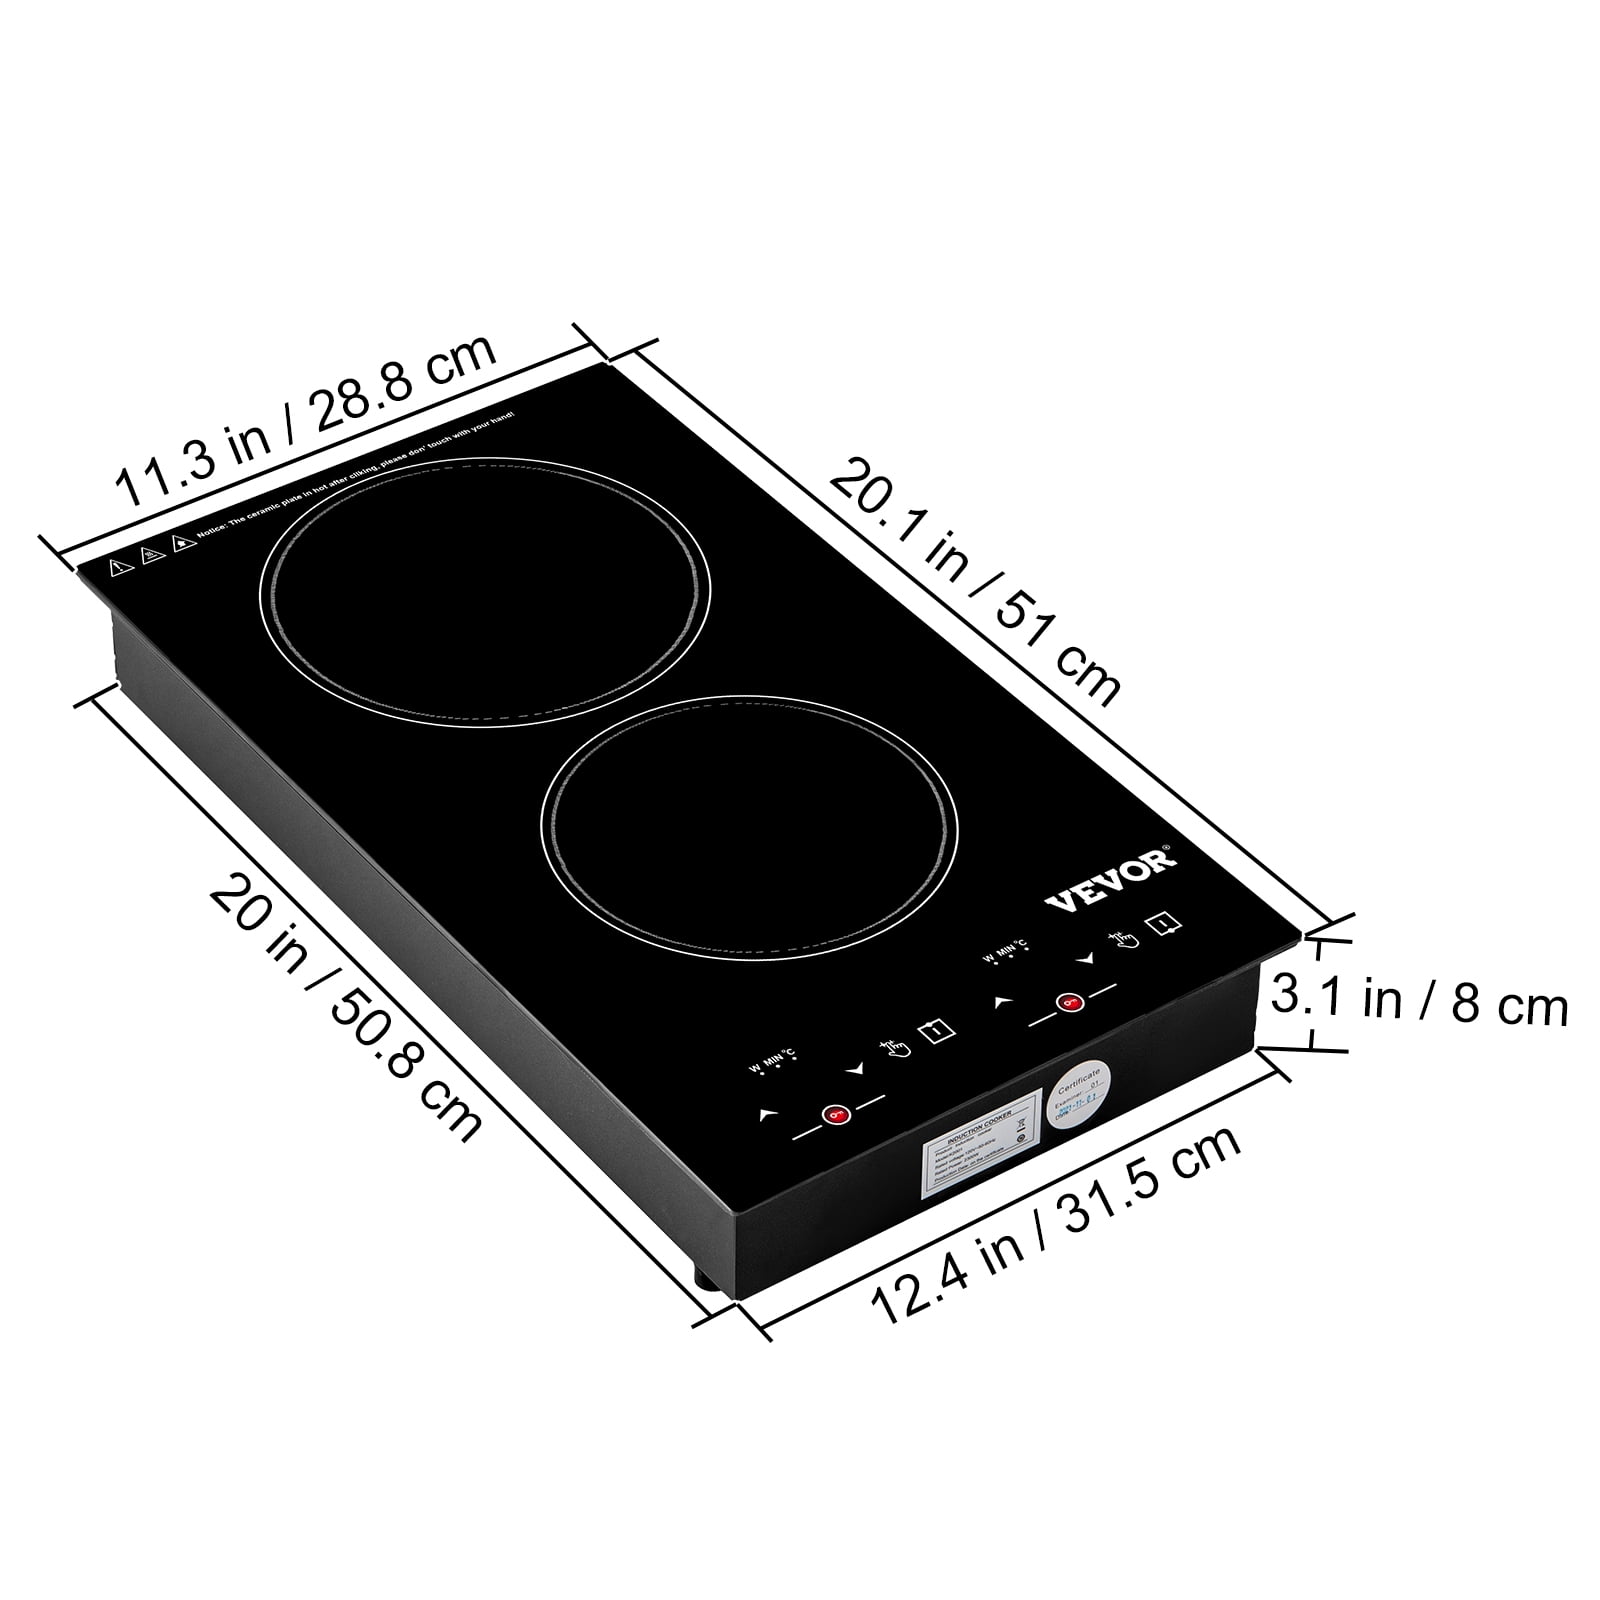 VEVOR Built in Electric Stove Top 30 in. 5 Burners Glass Radiant Cooktop  with Sensor Touch Control, Timer and Child Lock,Black Q30INCH8600W5R5SOV4 -  The Home Depot